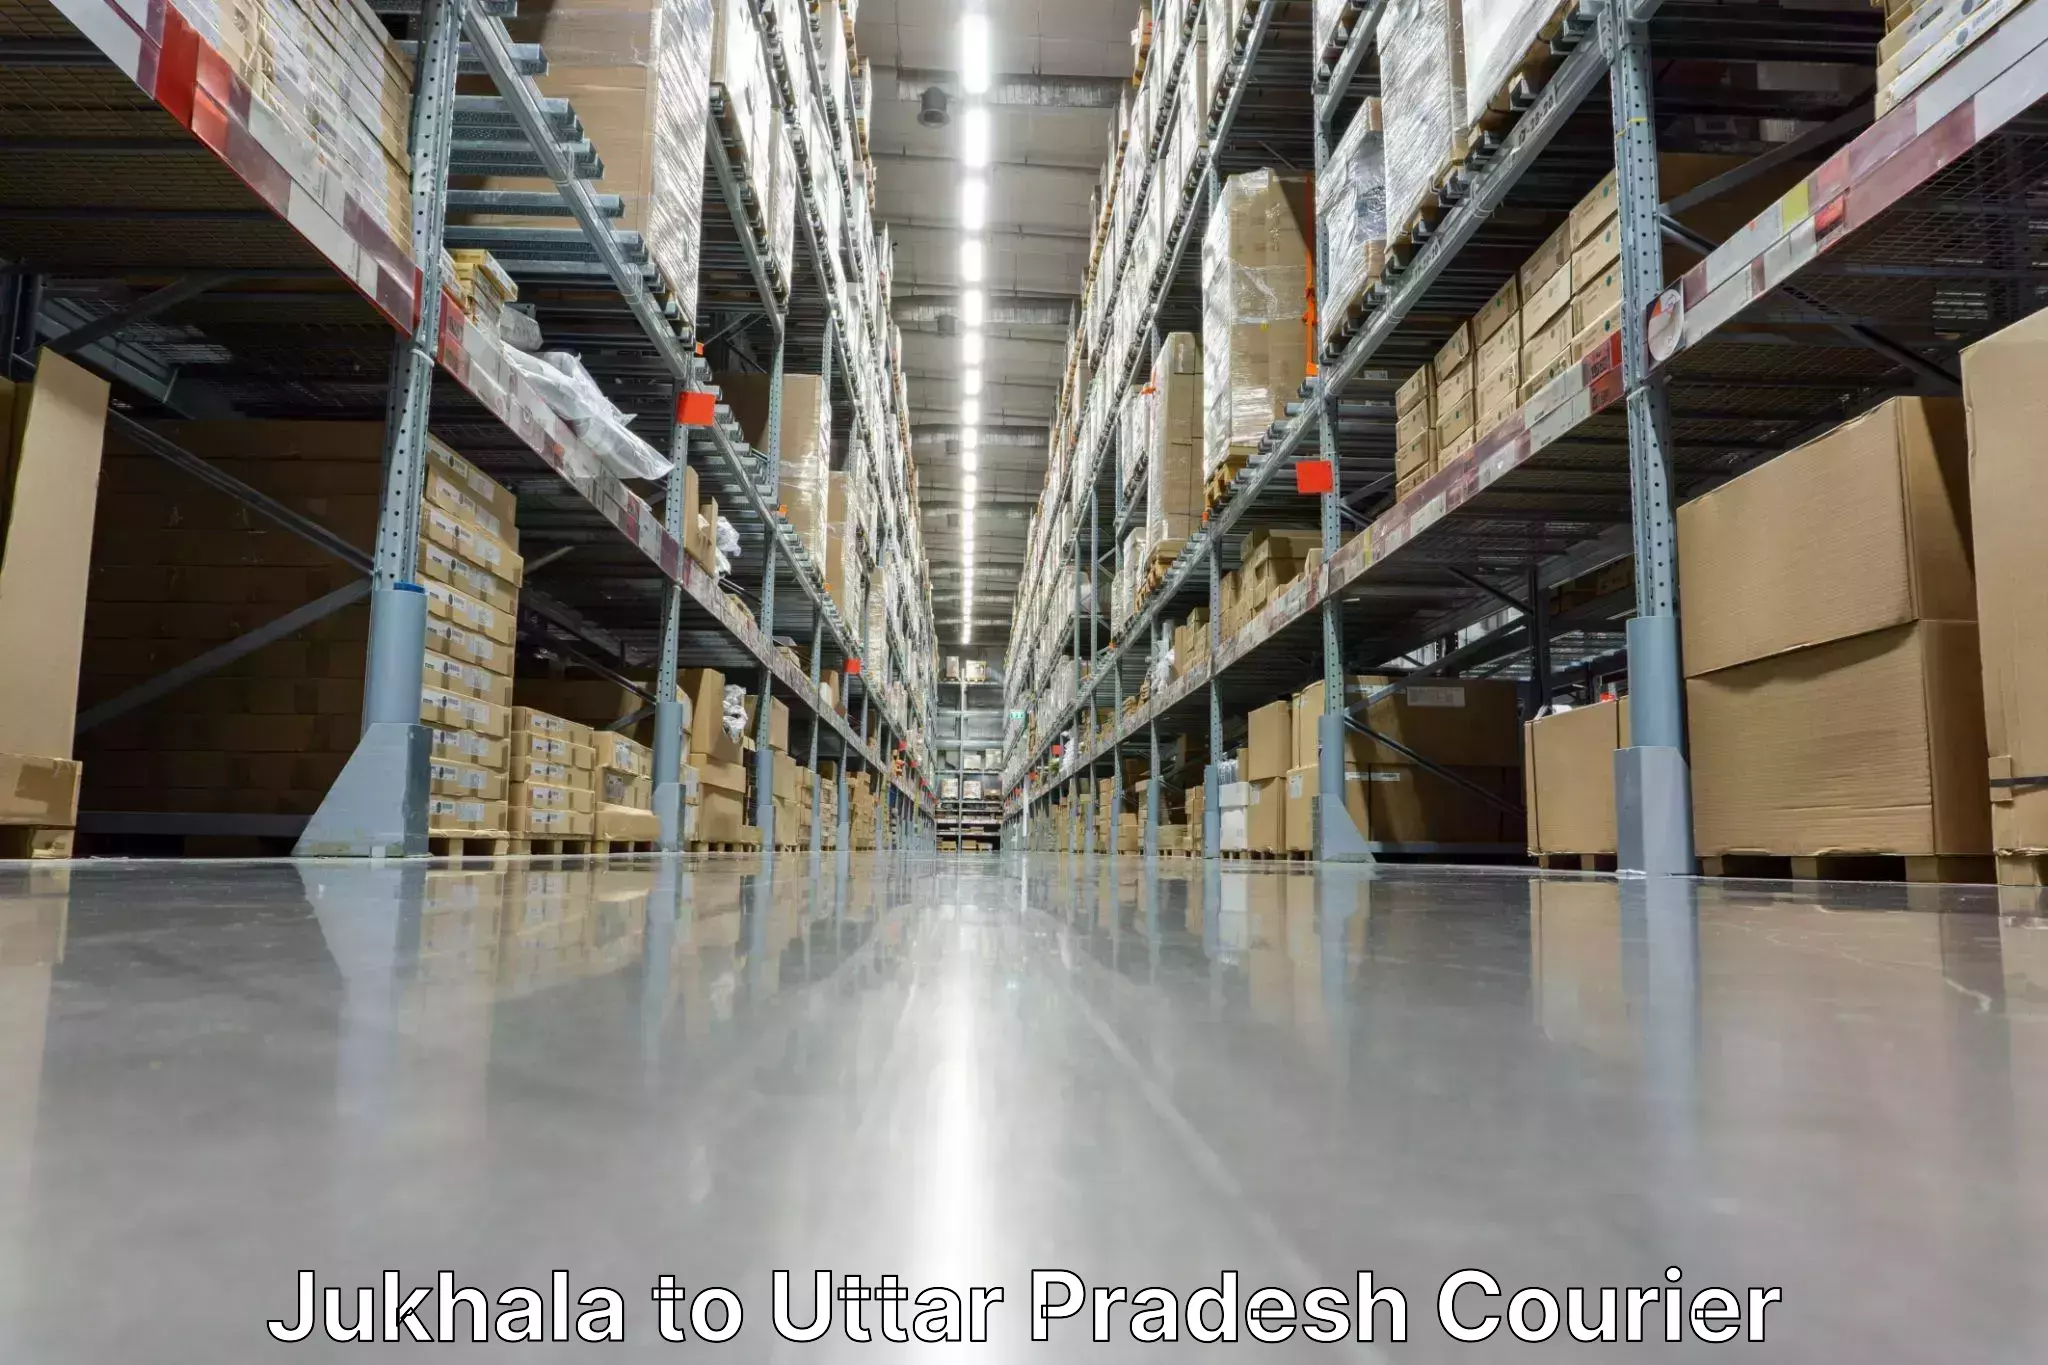 Online shipping calculator in Jukhala to Agra